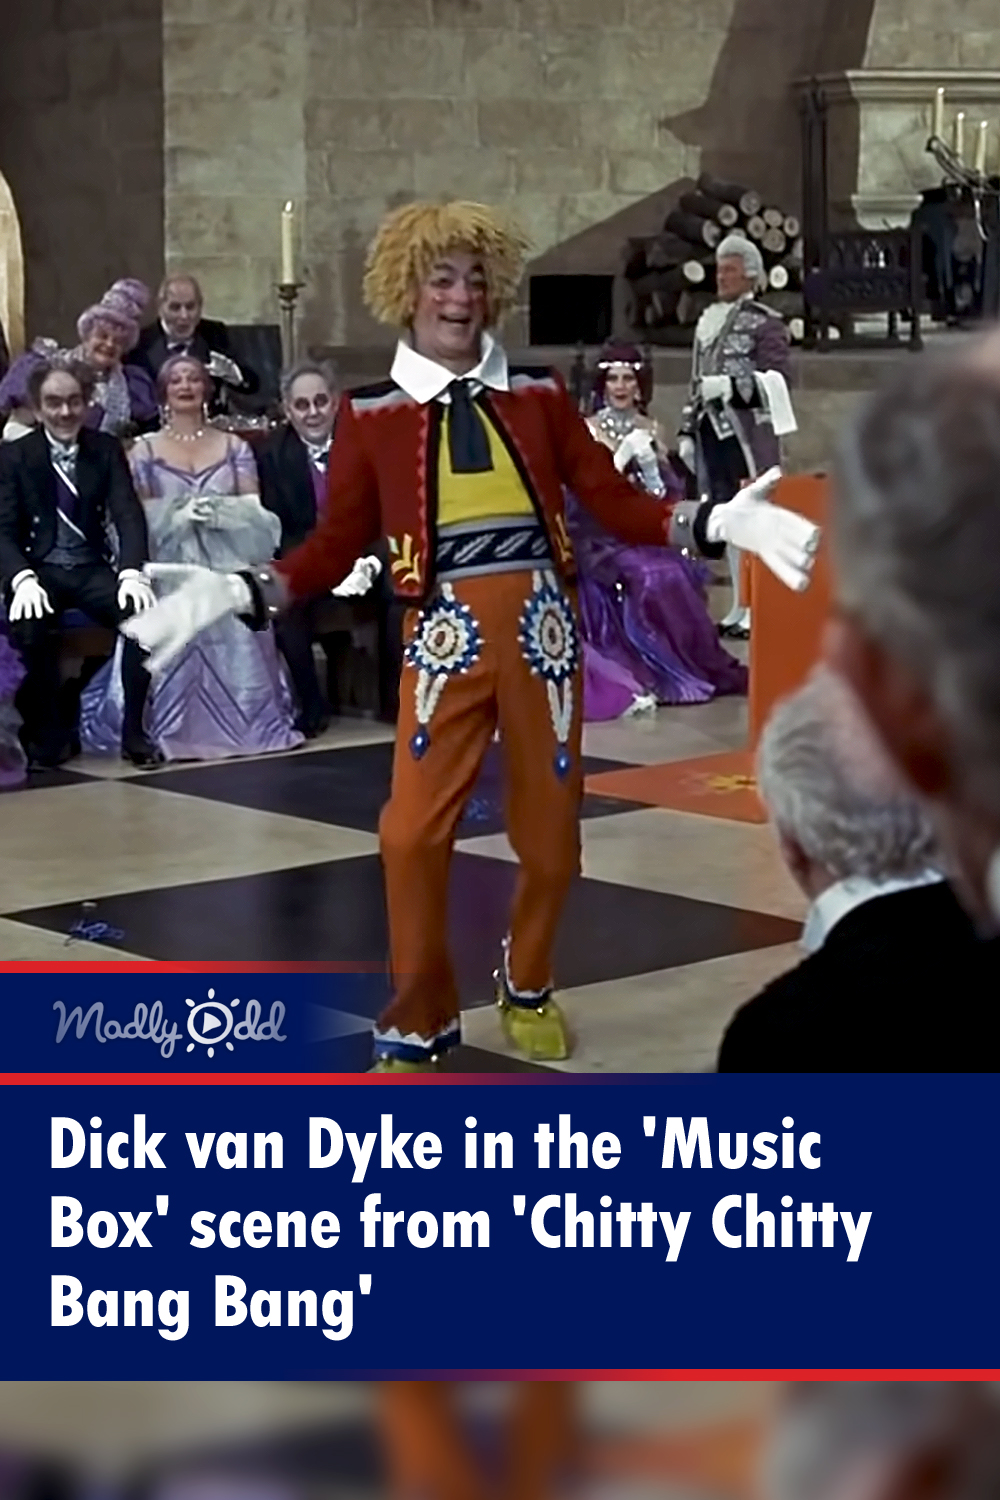 Dick van Dyke in the \'Music Box\' scene from \'Chitty Chitty Bang Bang\'